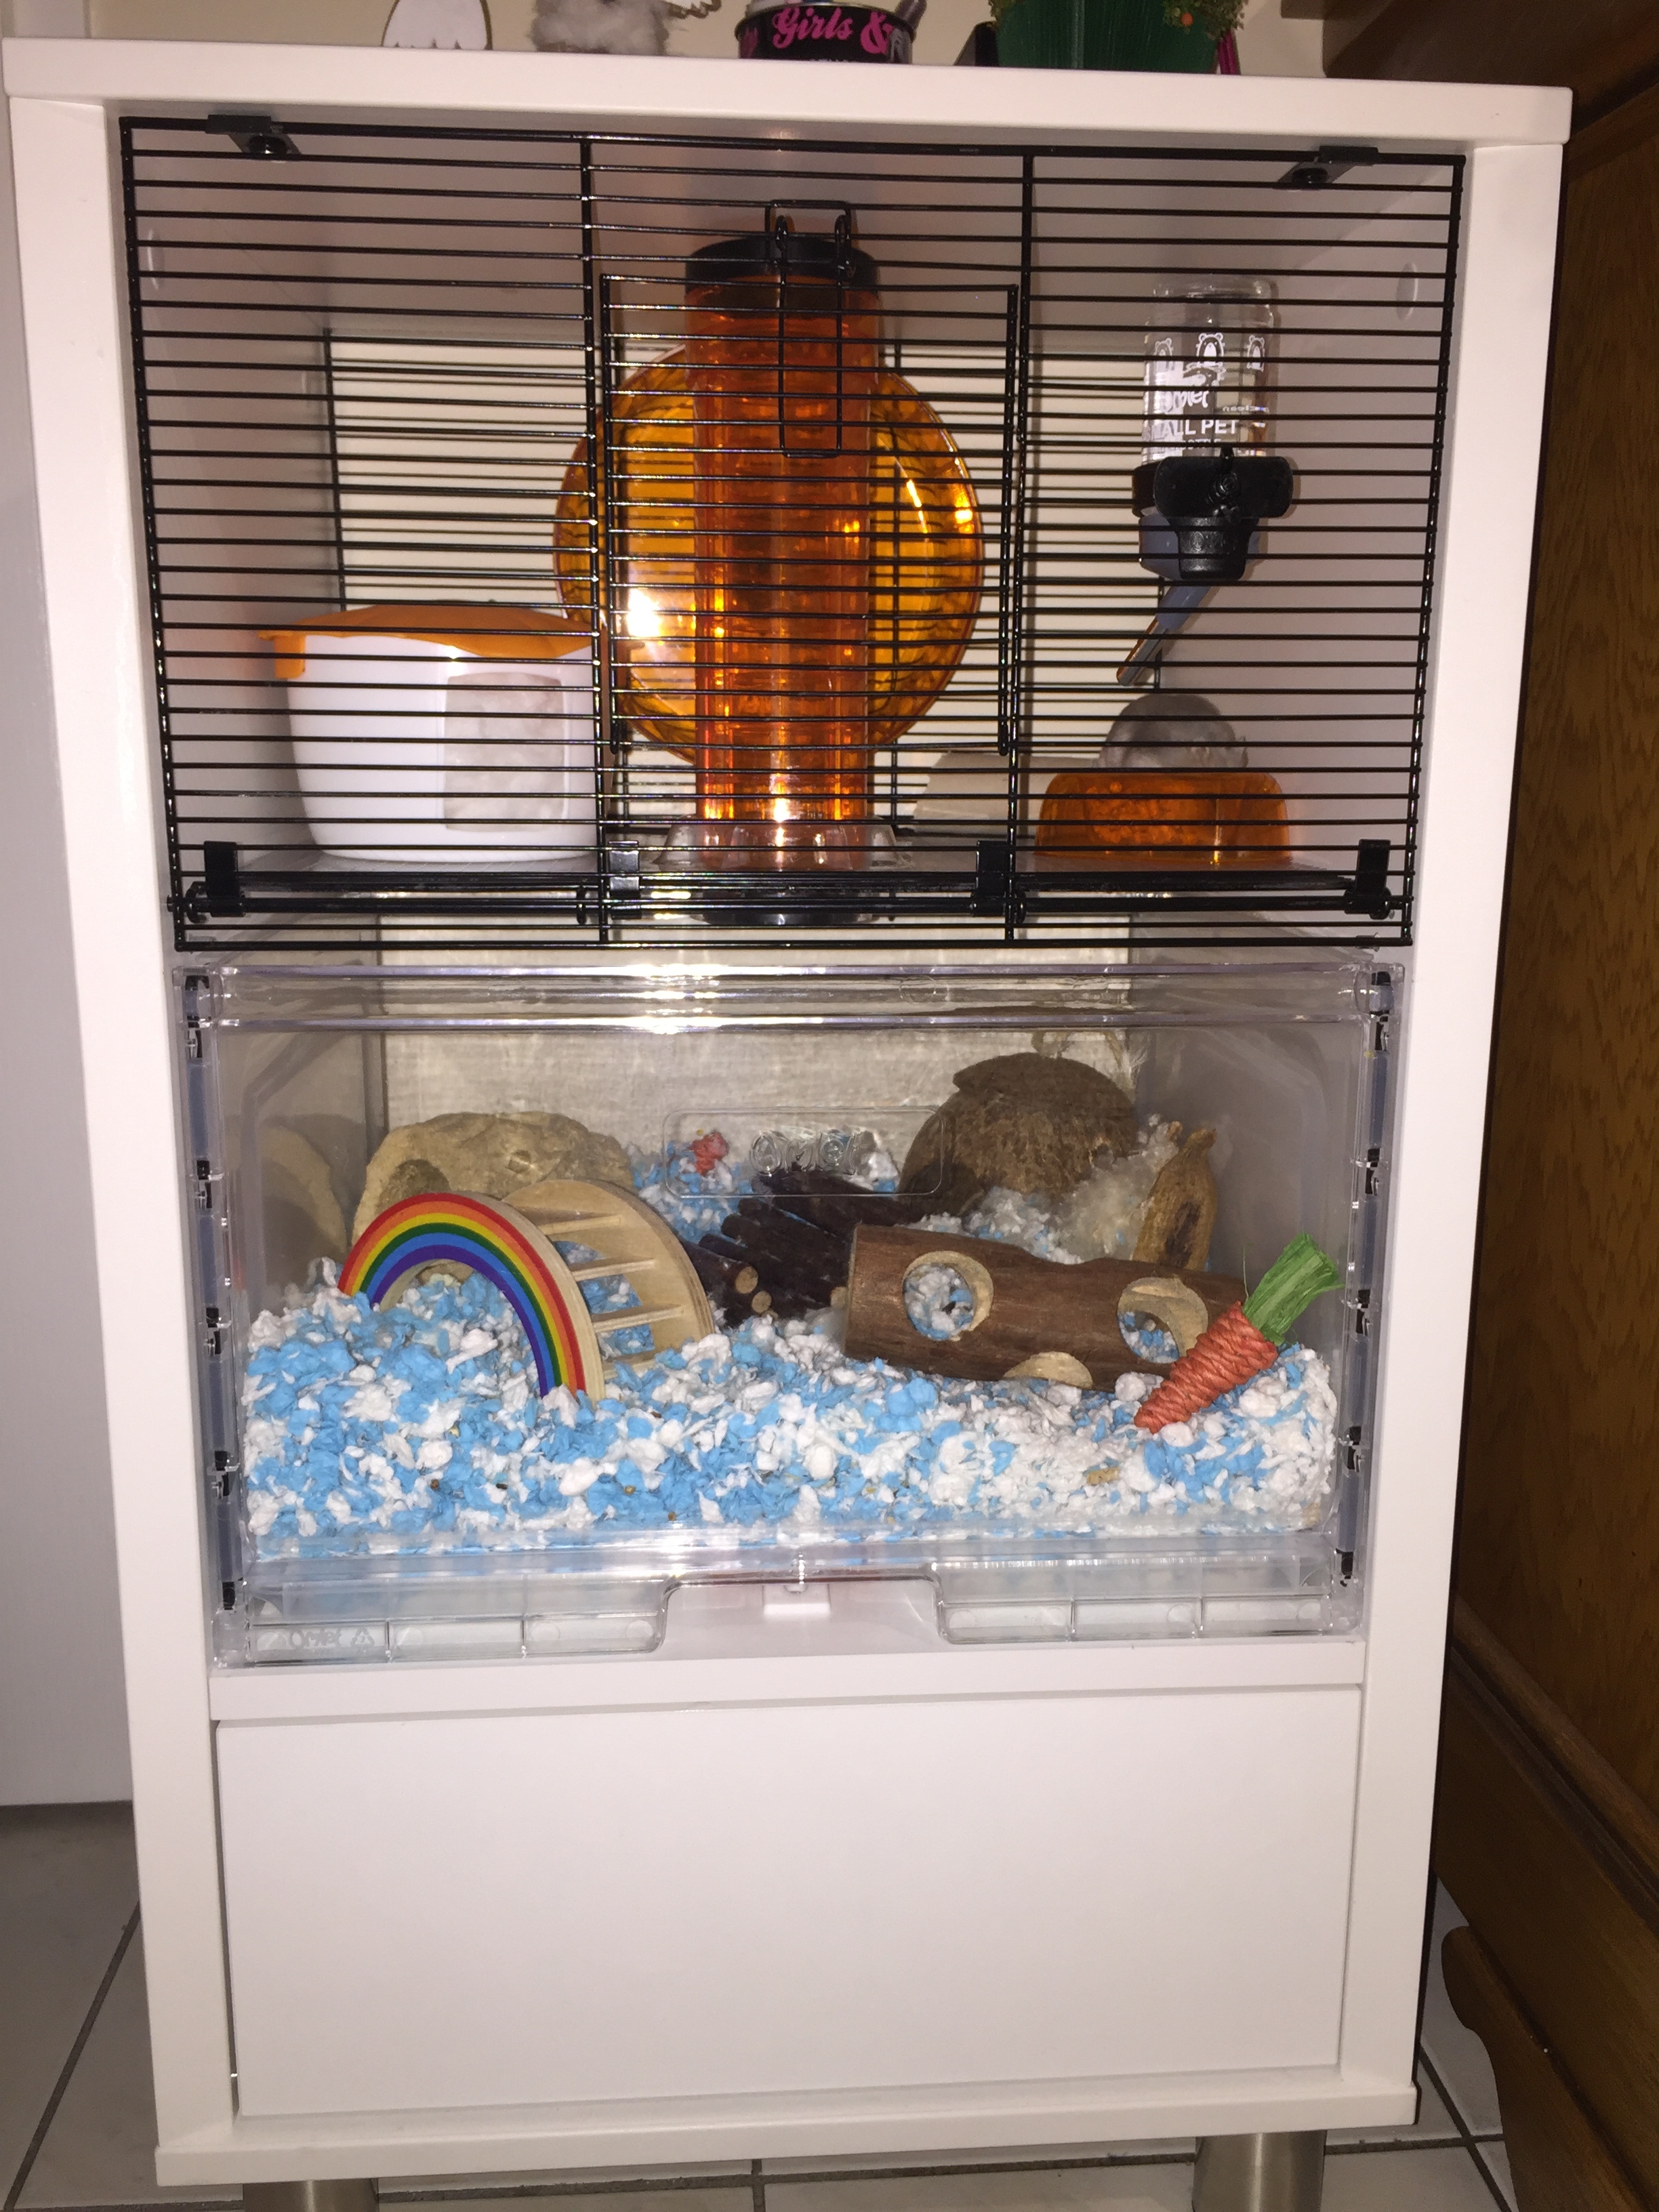 a qute hamster cage with lots of toys and accessories inside